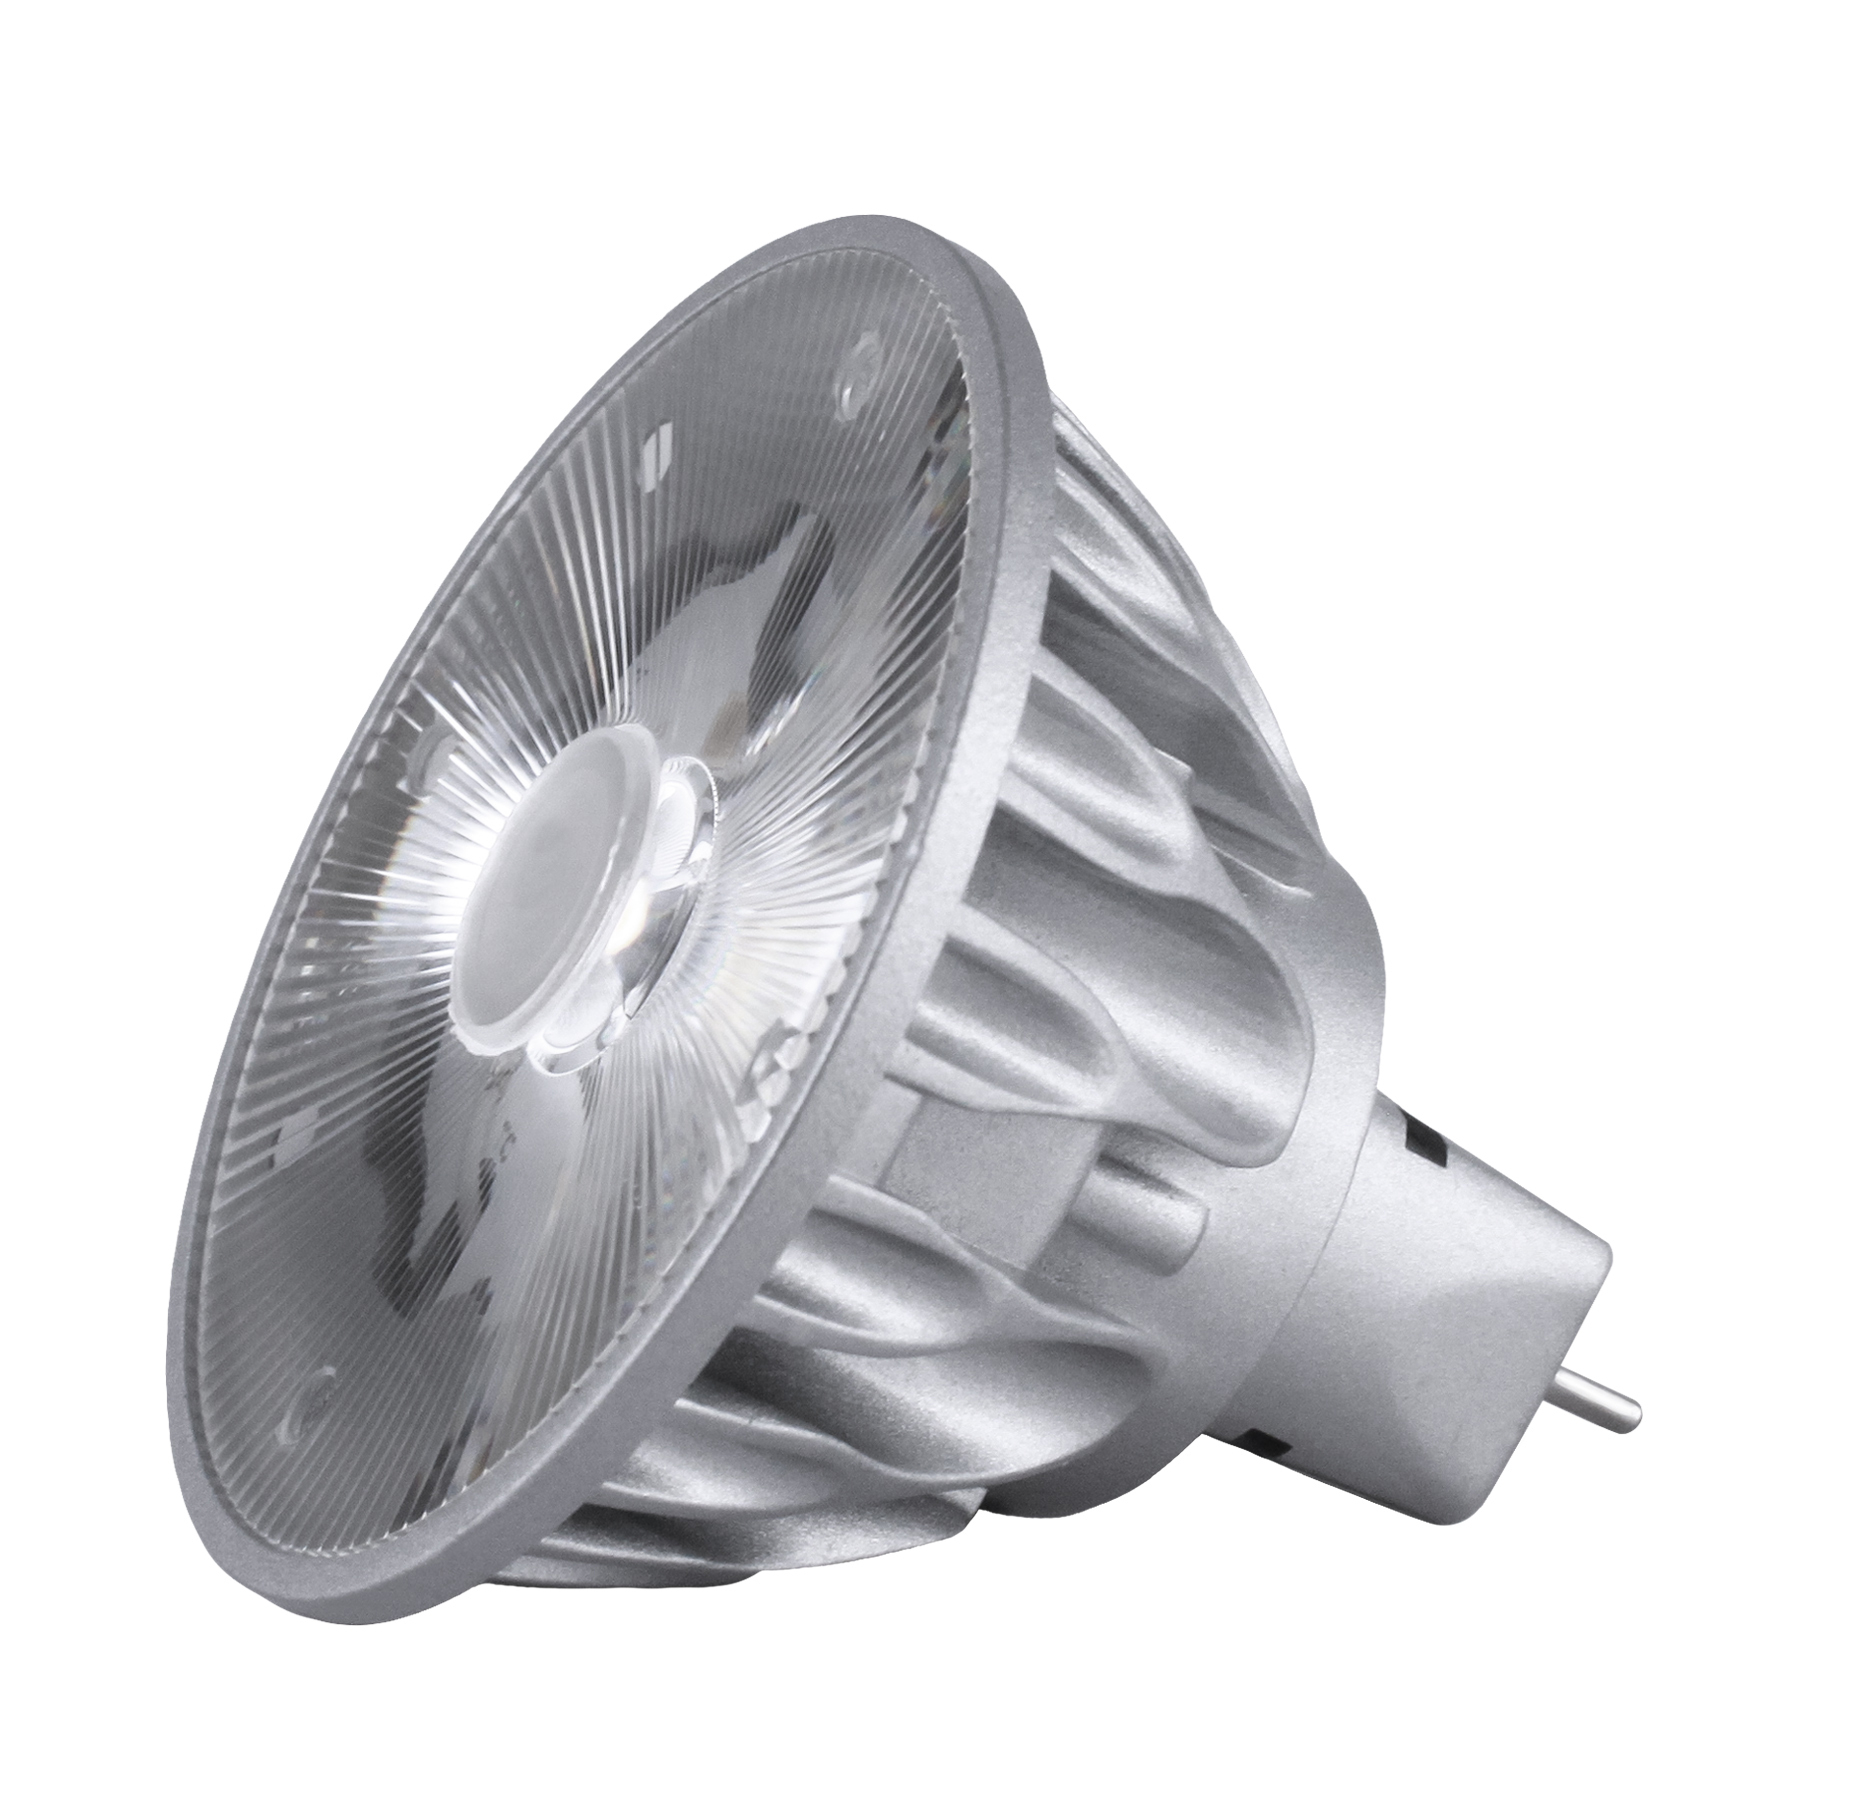 Soraa Launches Flicker Freetm Mr16 Led Lamps Business Wire inside proportions 1856 X 1800